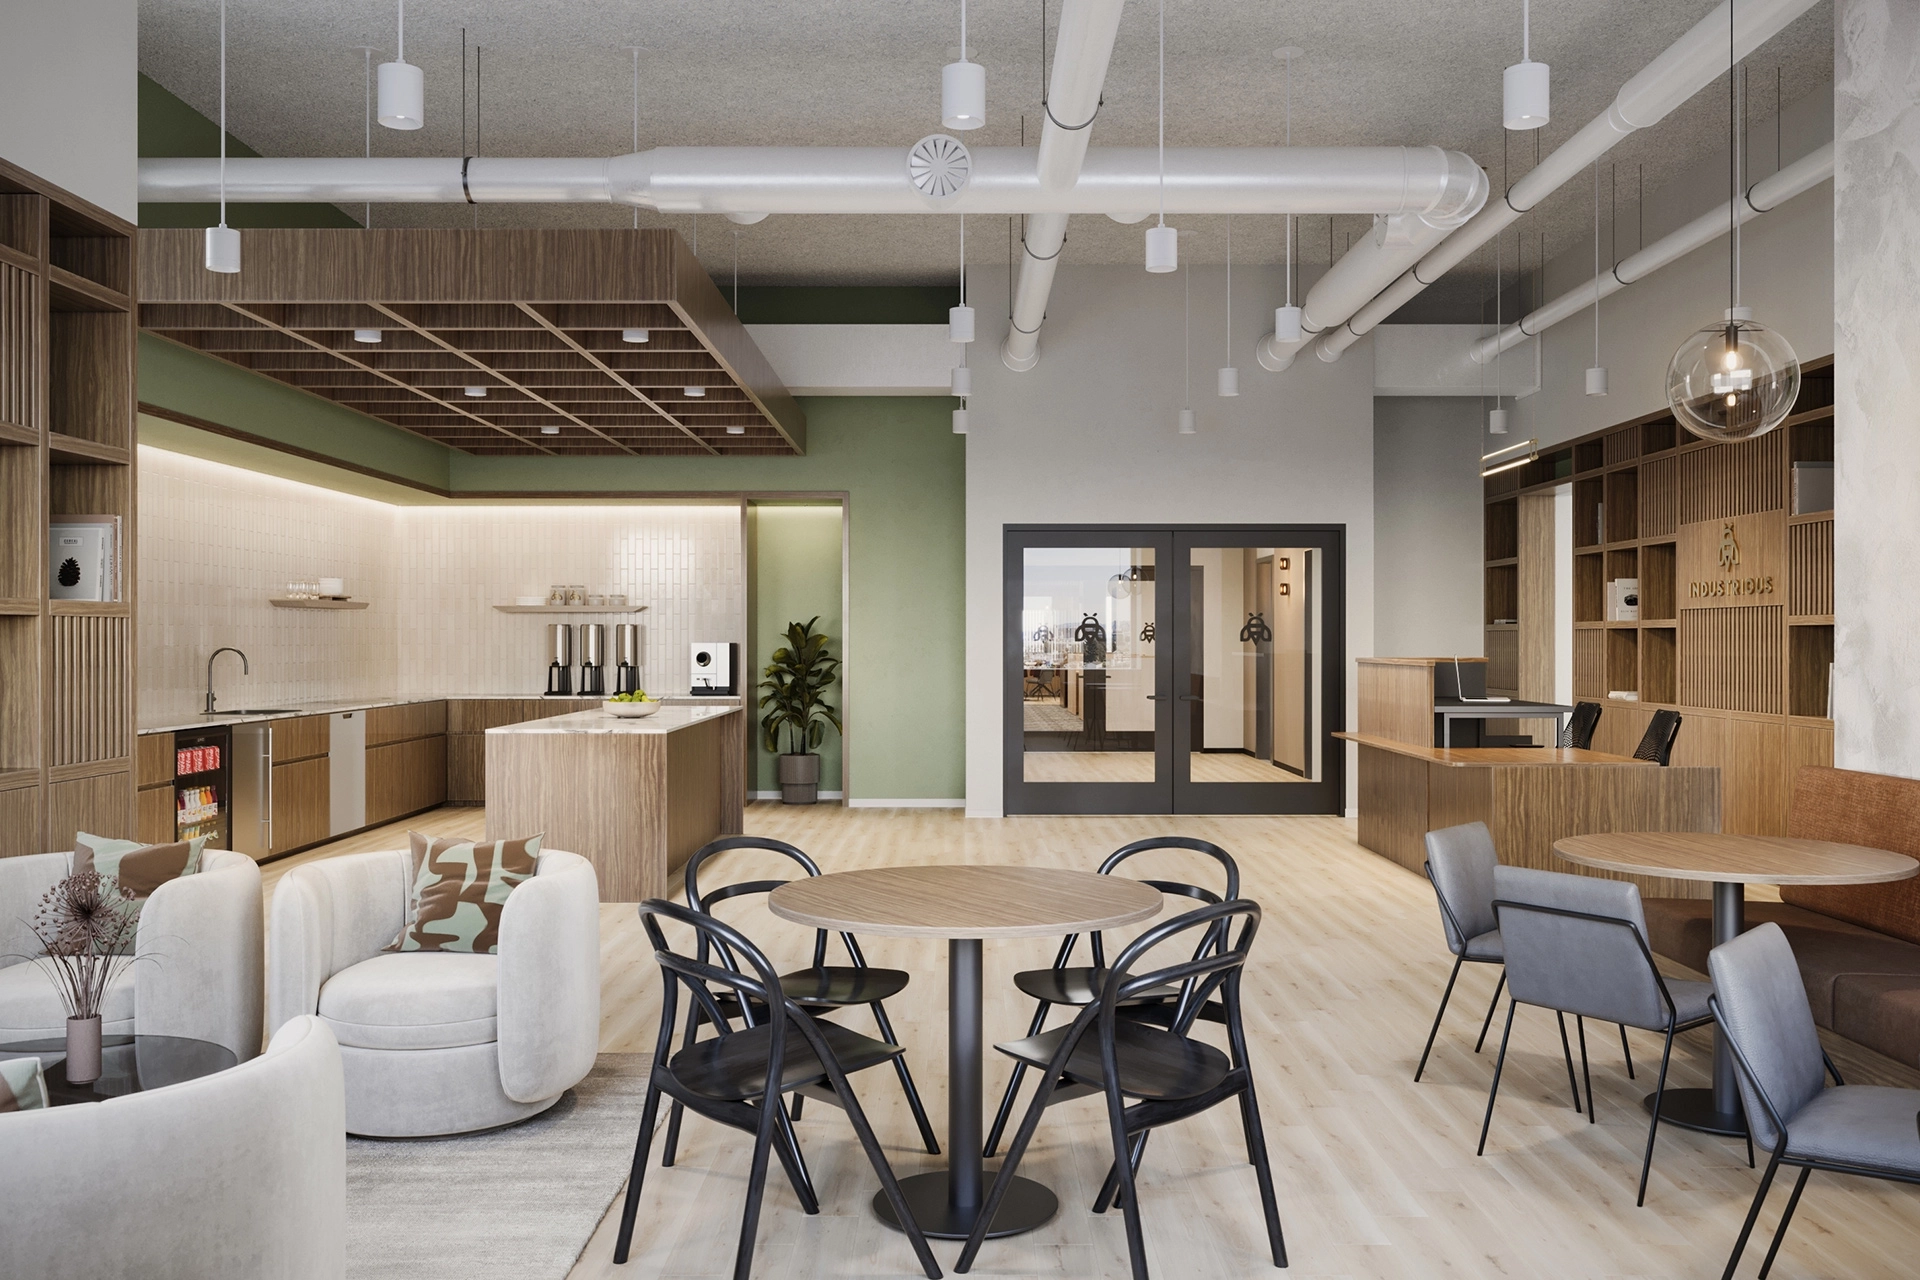 Modern office workspace with mixed seating, kitchen area, and exposed ceiling pipes. Neutral and green color palette with natural wood accents.